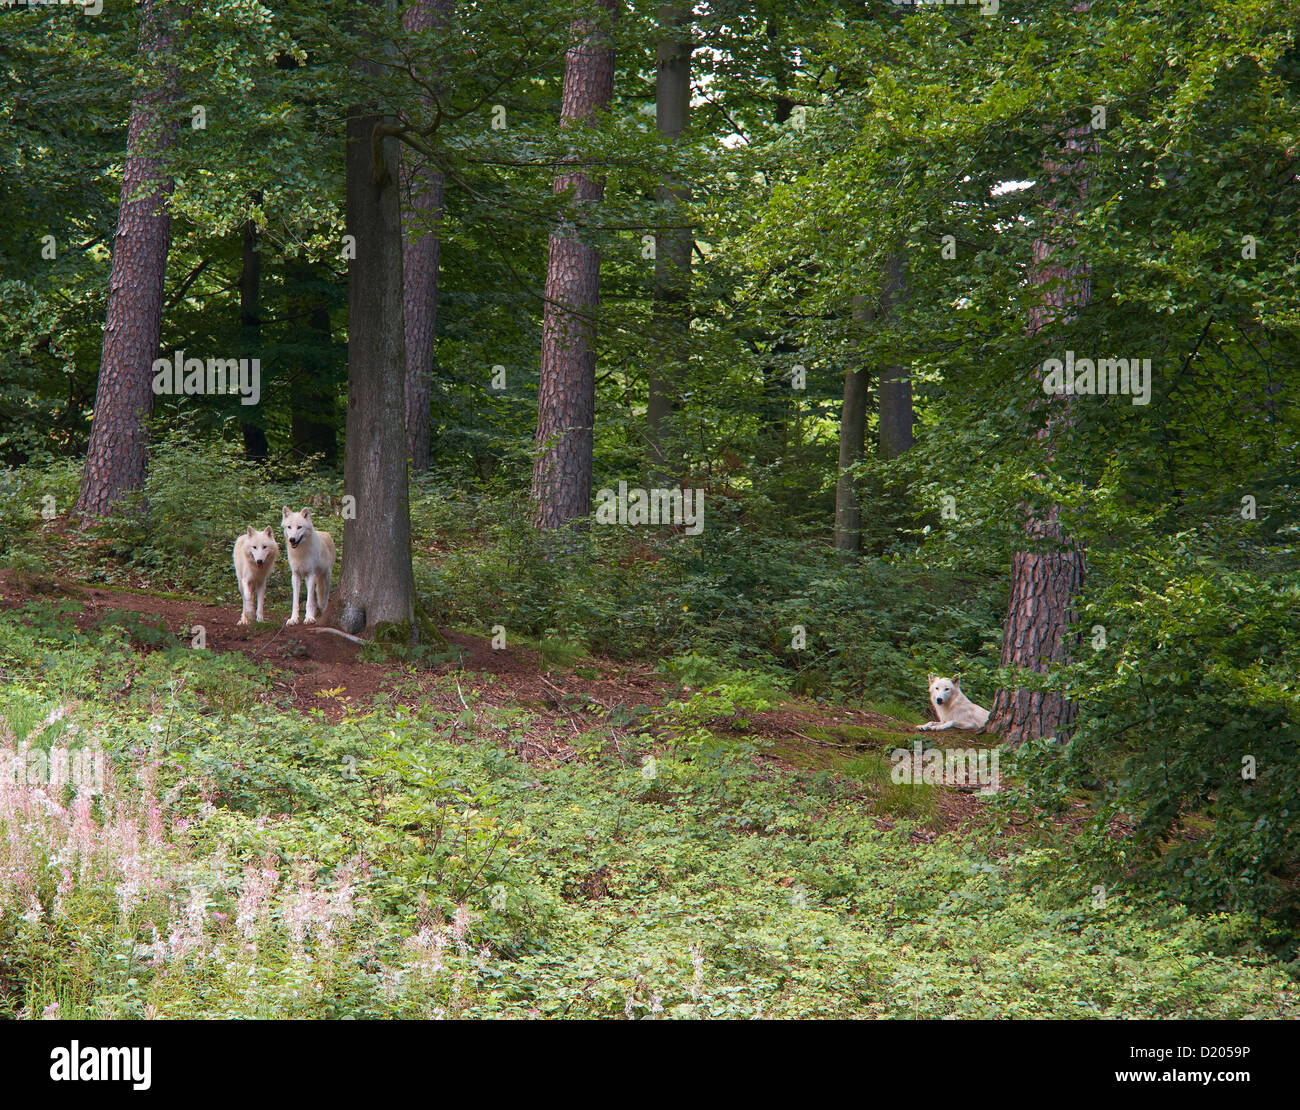 Wolves at the park Wolfspark Werner Freund, City of wolves, Merzig, Saarland, Germany, Europe Stock Photo